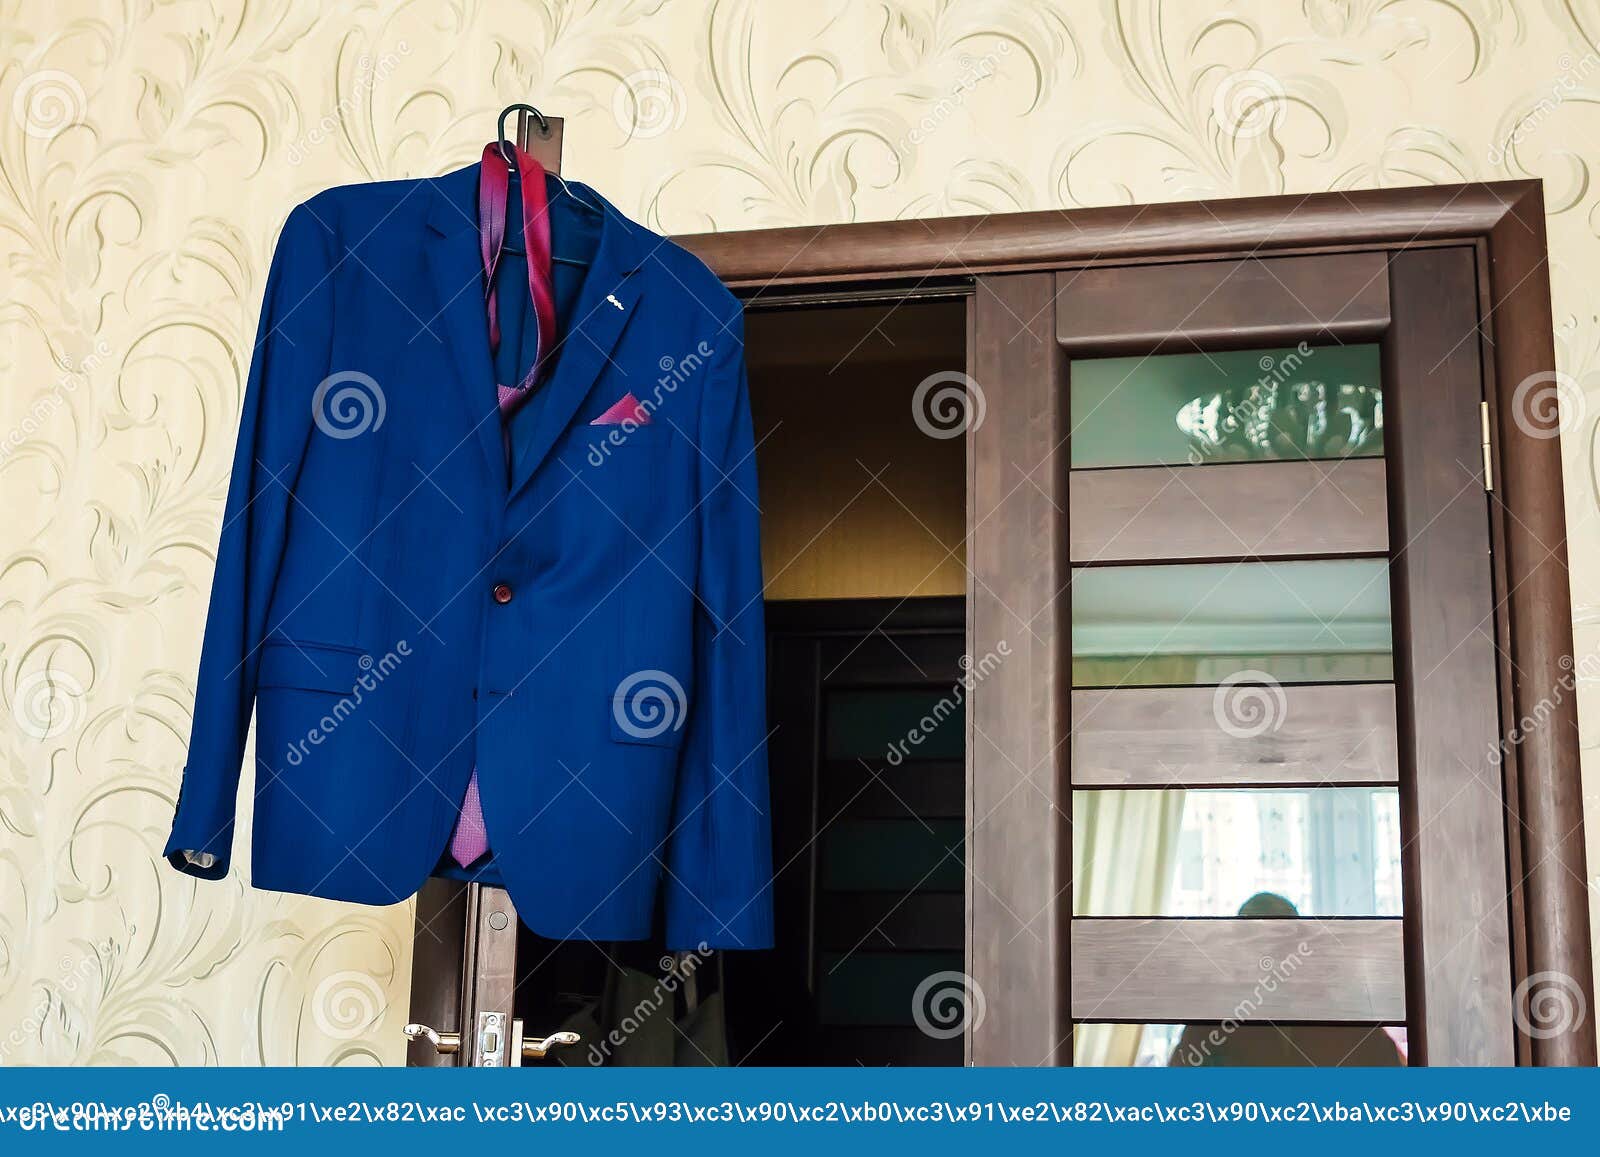 Jacket, Tie and Shirt Hanging Stock Image - Image of apartment, adult ...